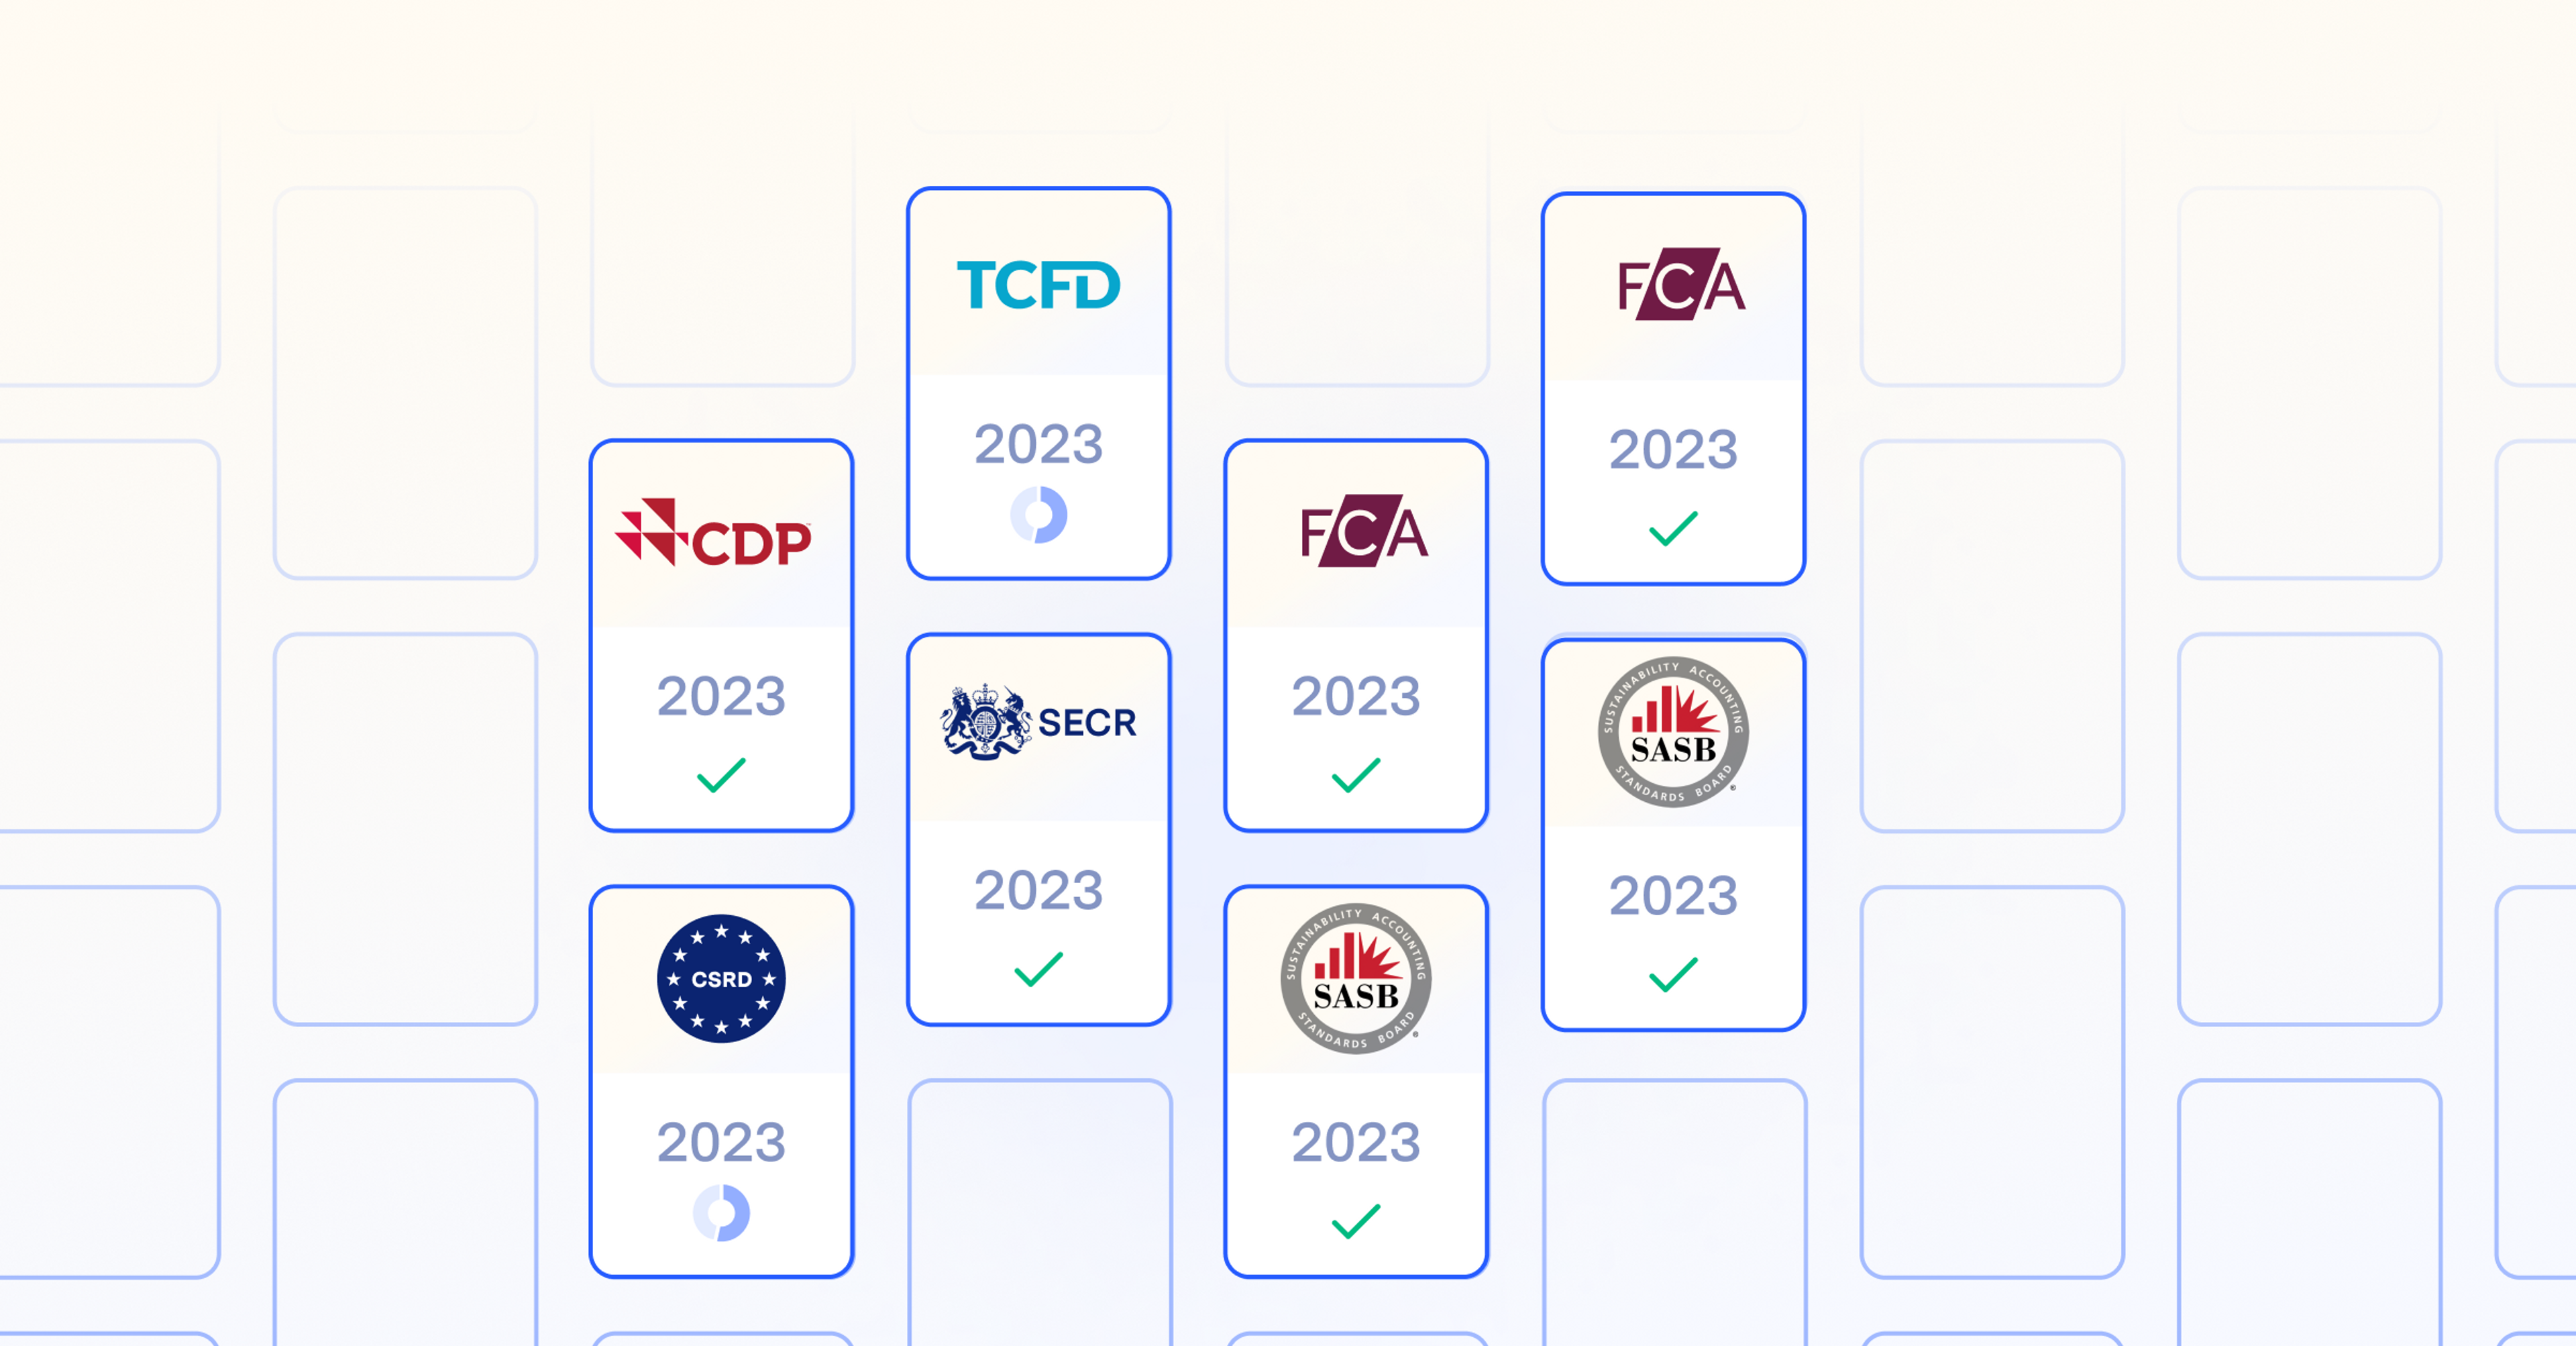 Illustration of grid of cards with reporting logos like TCFD and CDP for 2023